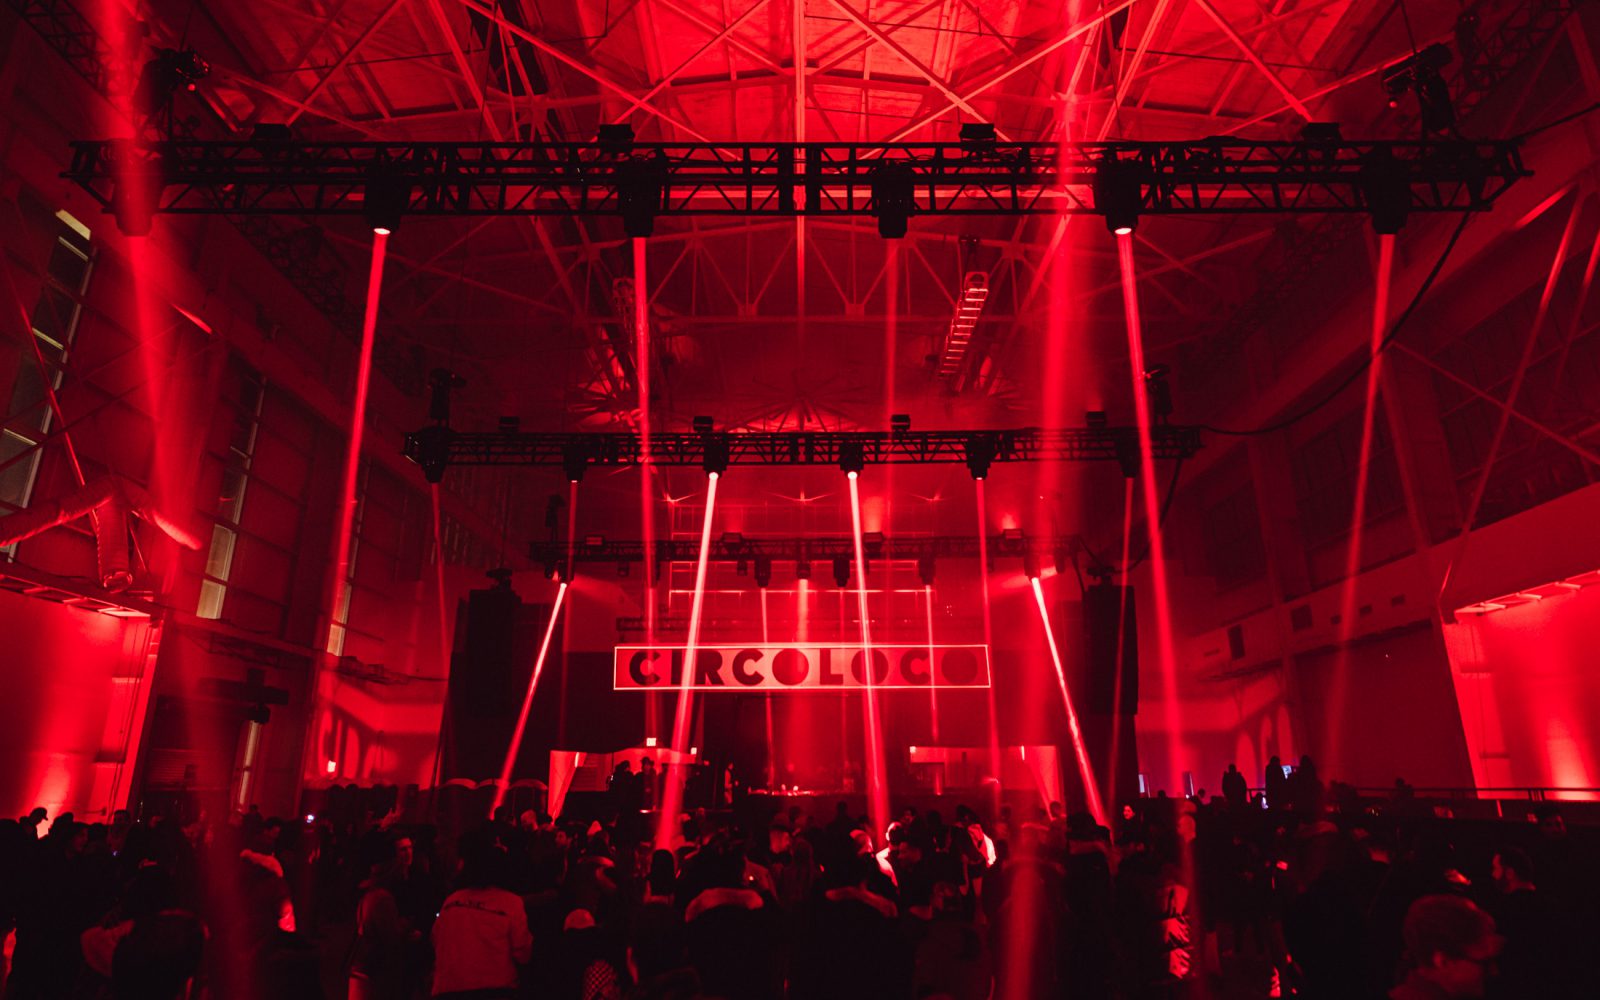 Circo Loco New York's hottest Fashion Week after party